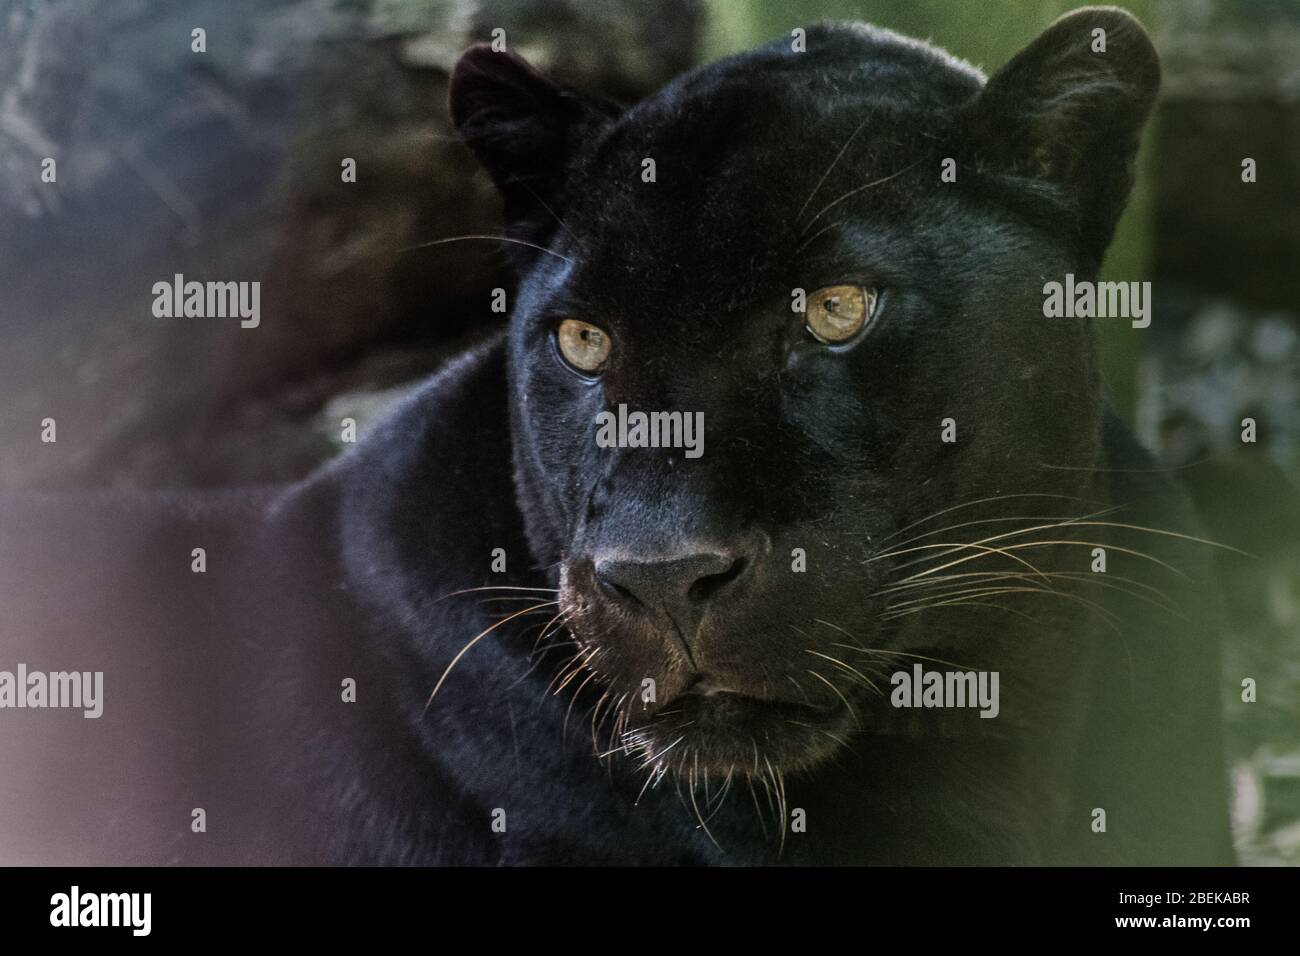 Black Panther Animal High Resolution Stock Photography and Images - Alamy